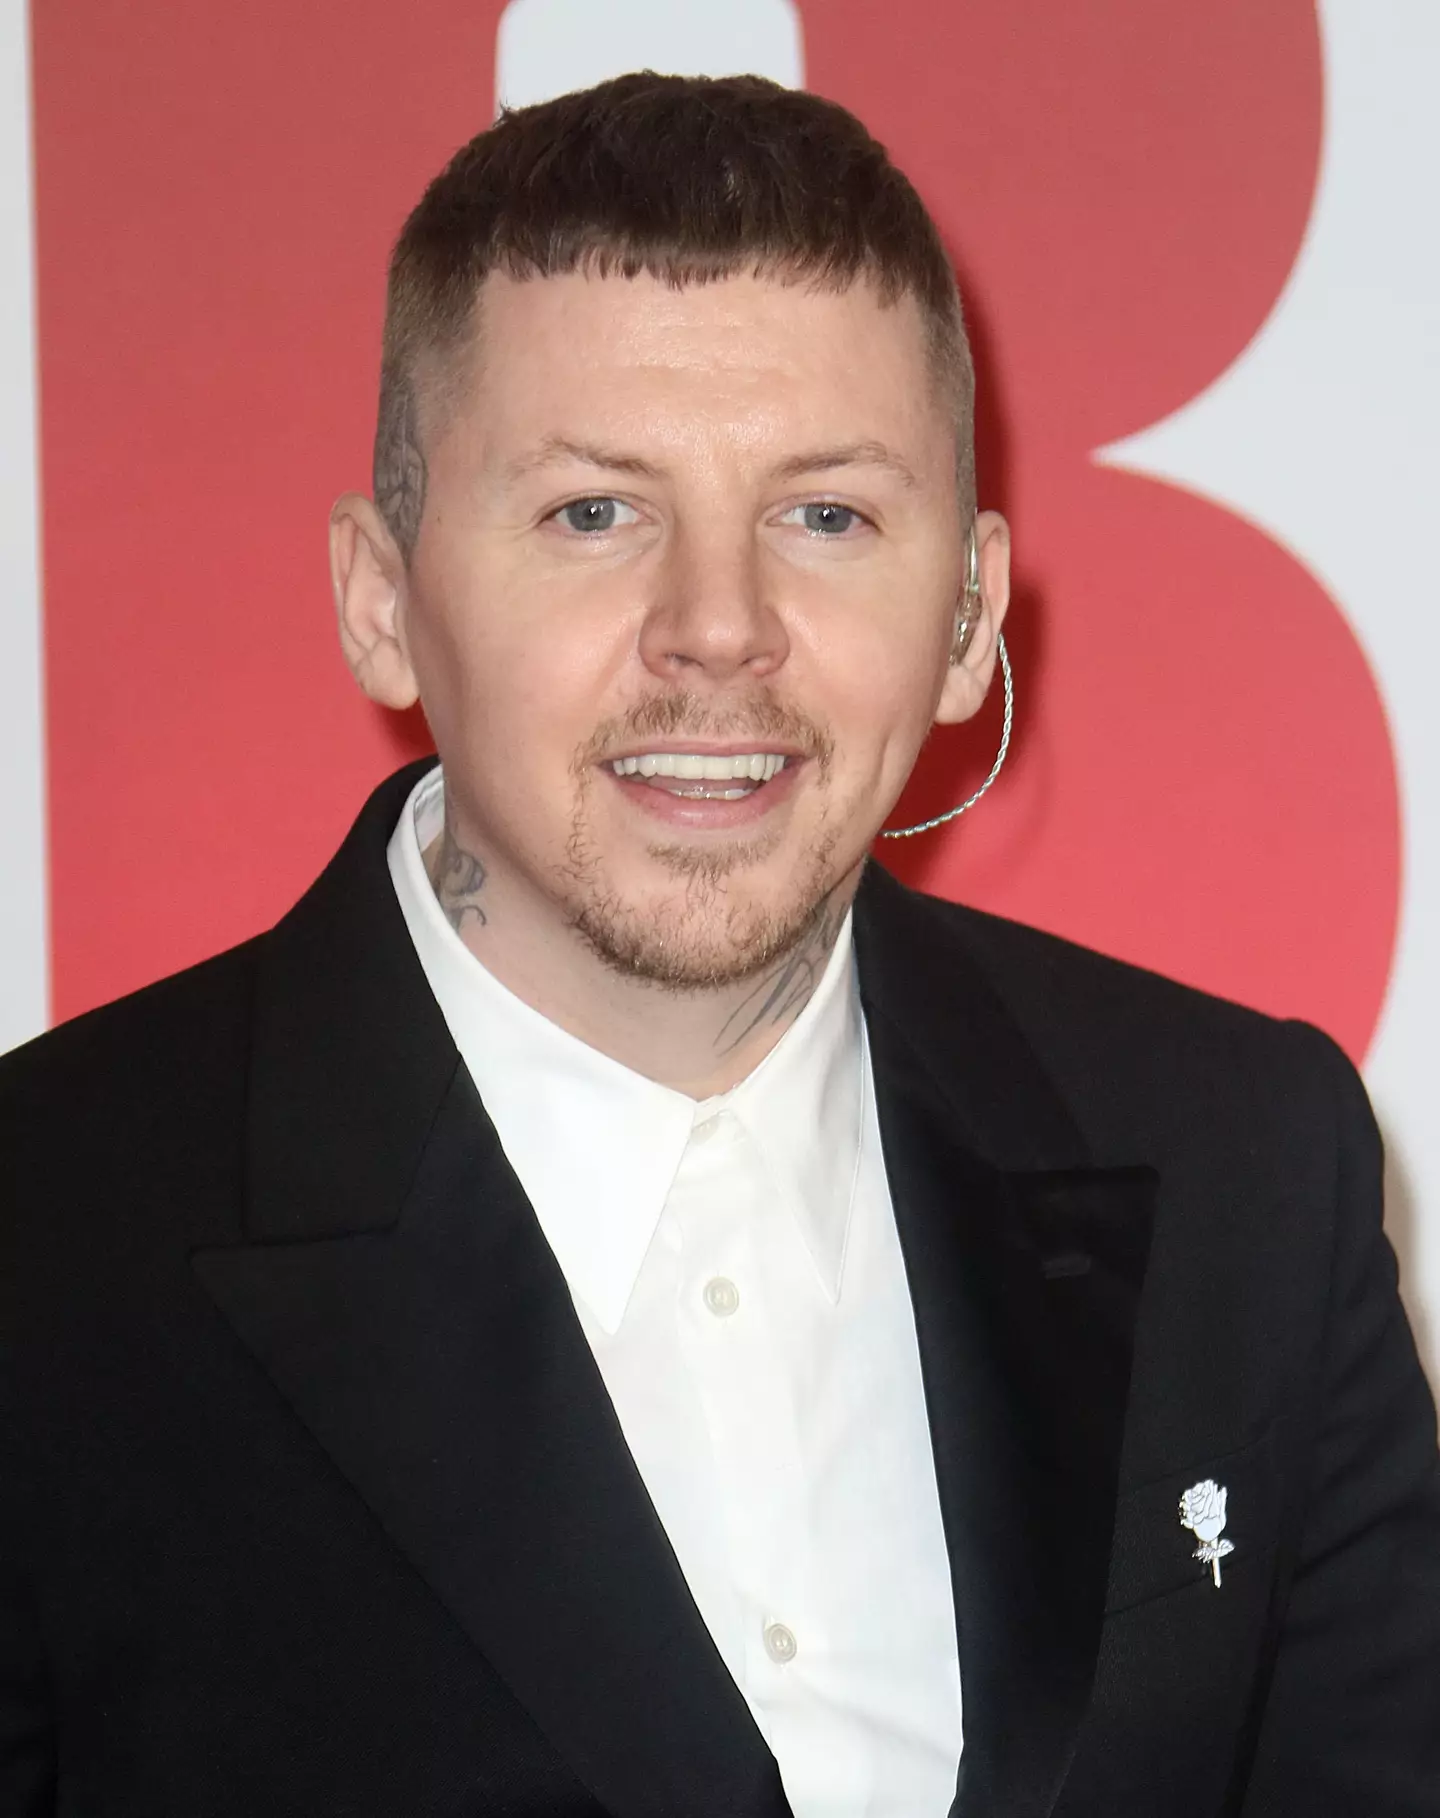 Professor Green has revealed he lost £600,000 when he was attacked on his doorstep.